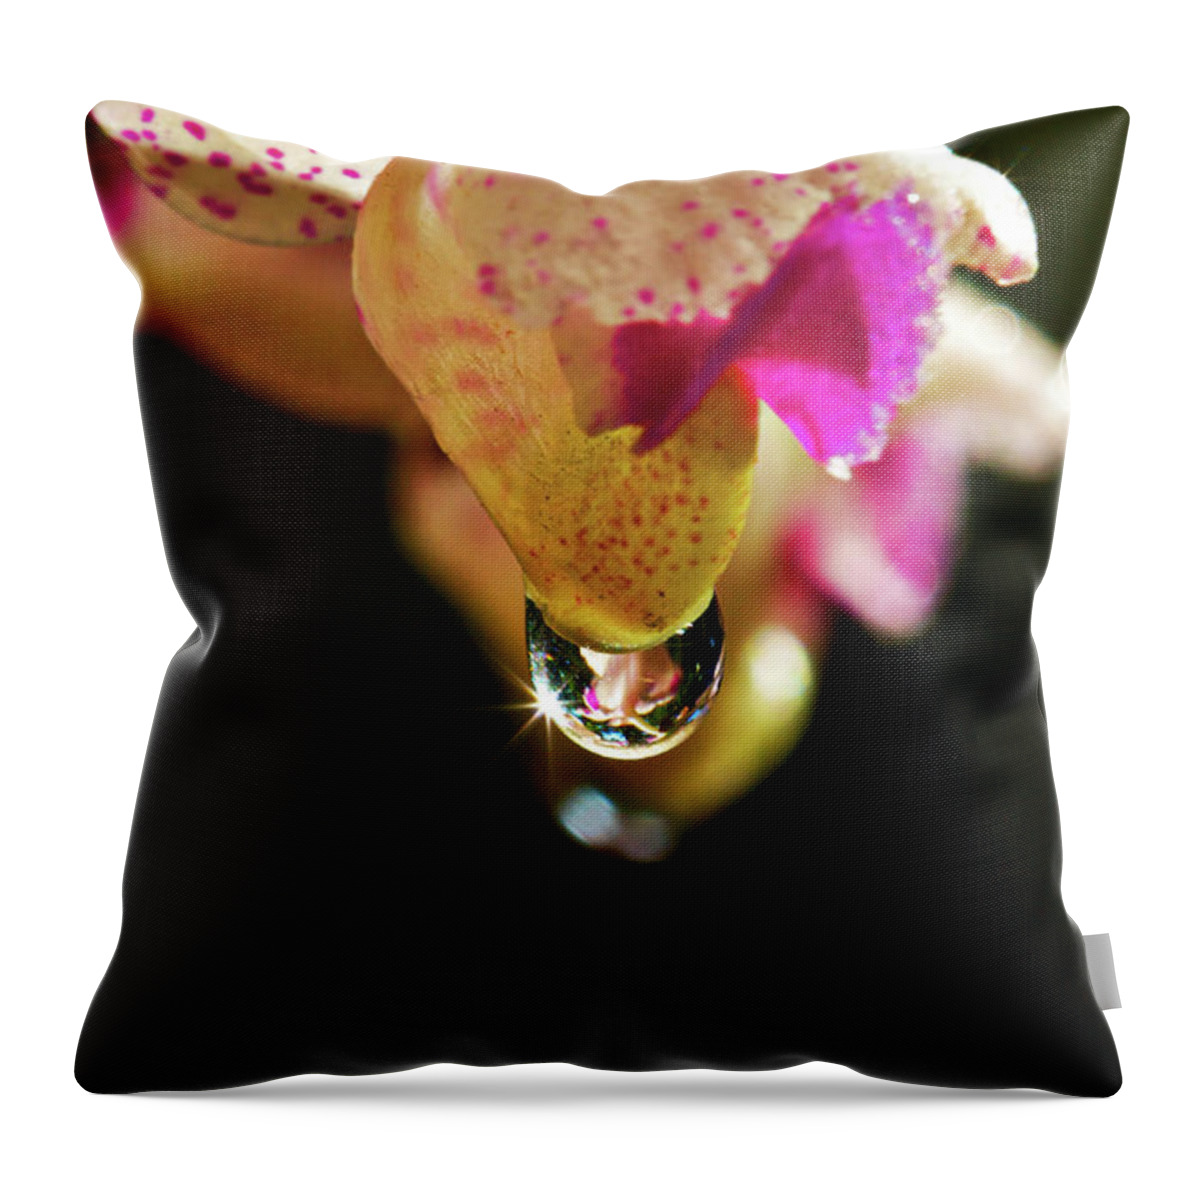 Petal Throw Pillow featuring the photograph Orchid And Water Drop by Photography By Jeremy Villasis. Philippines.